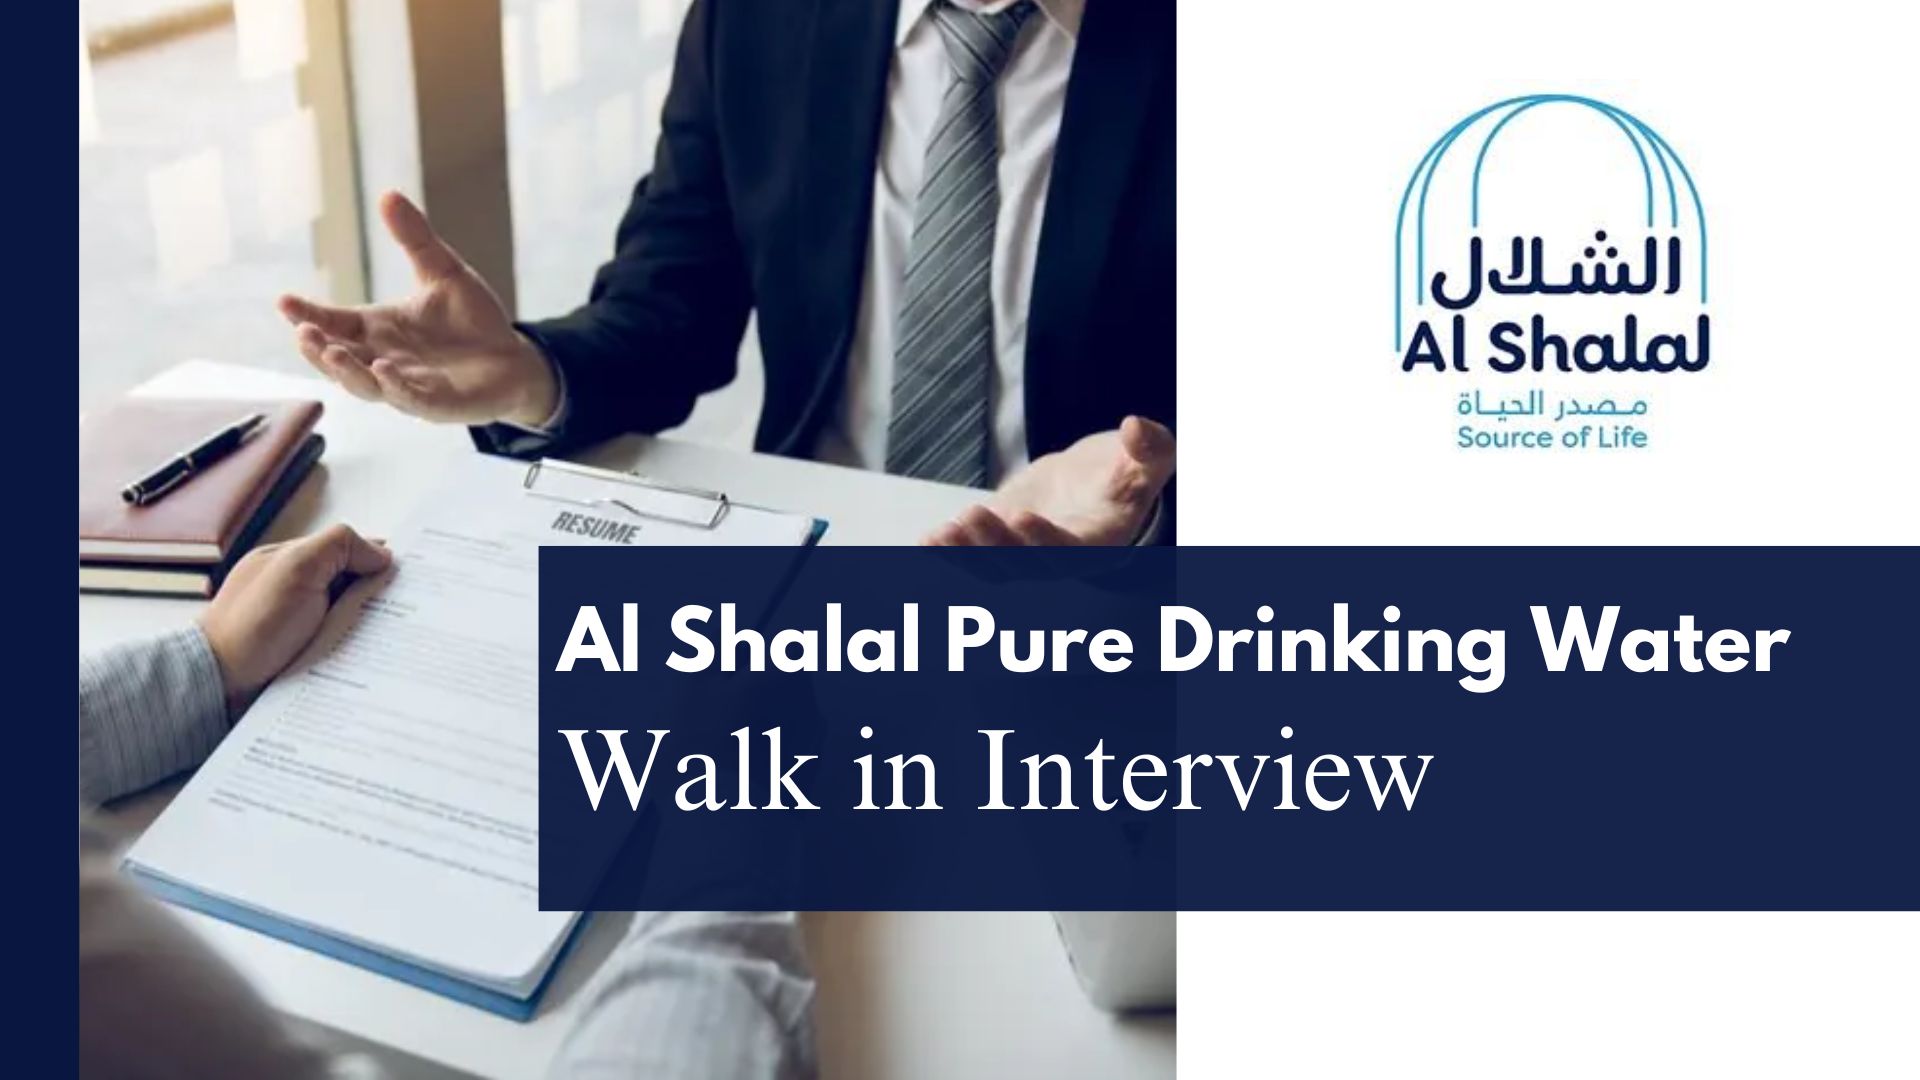 Al Shalal Pure Drinking Water Announced Walk in Interview